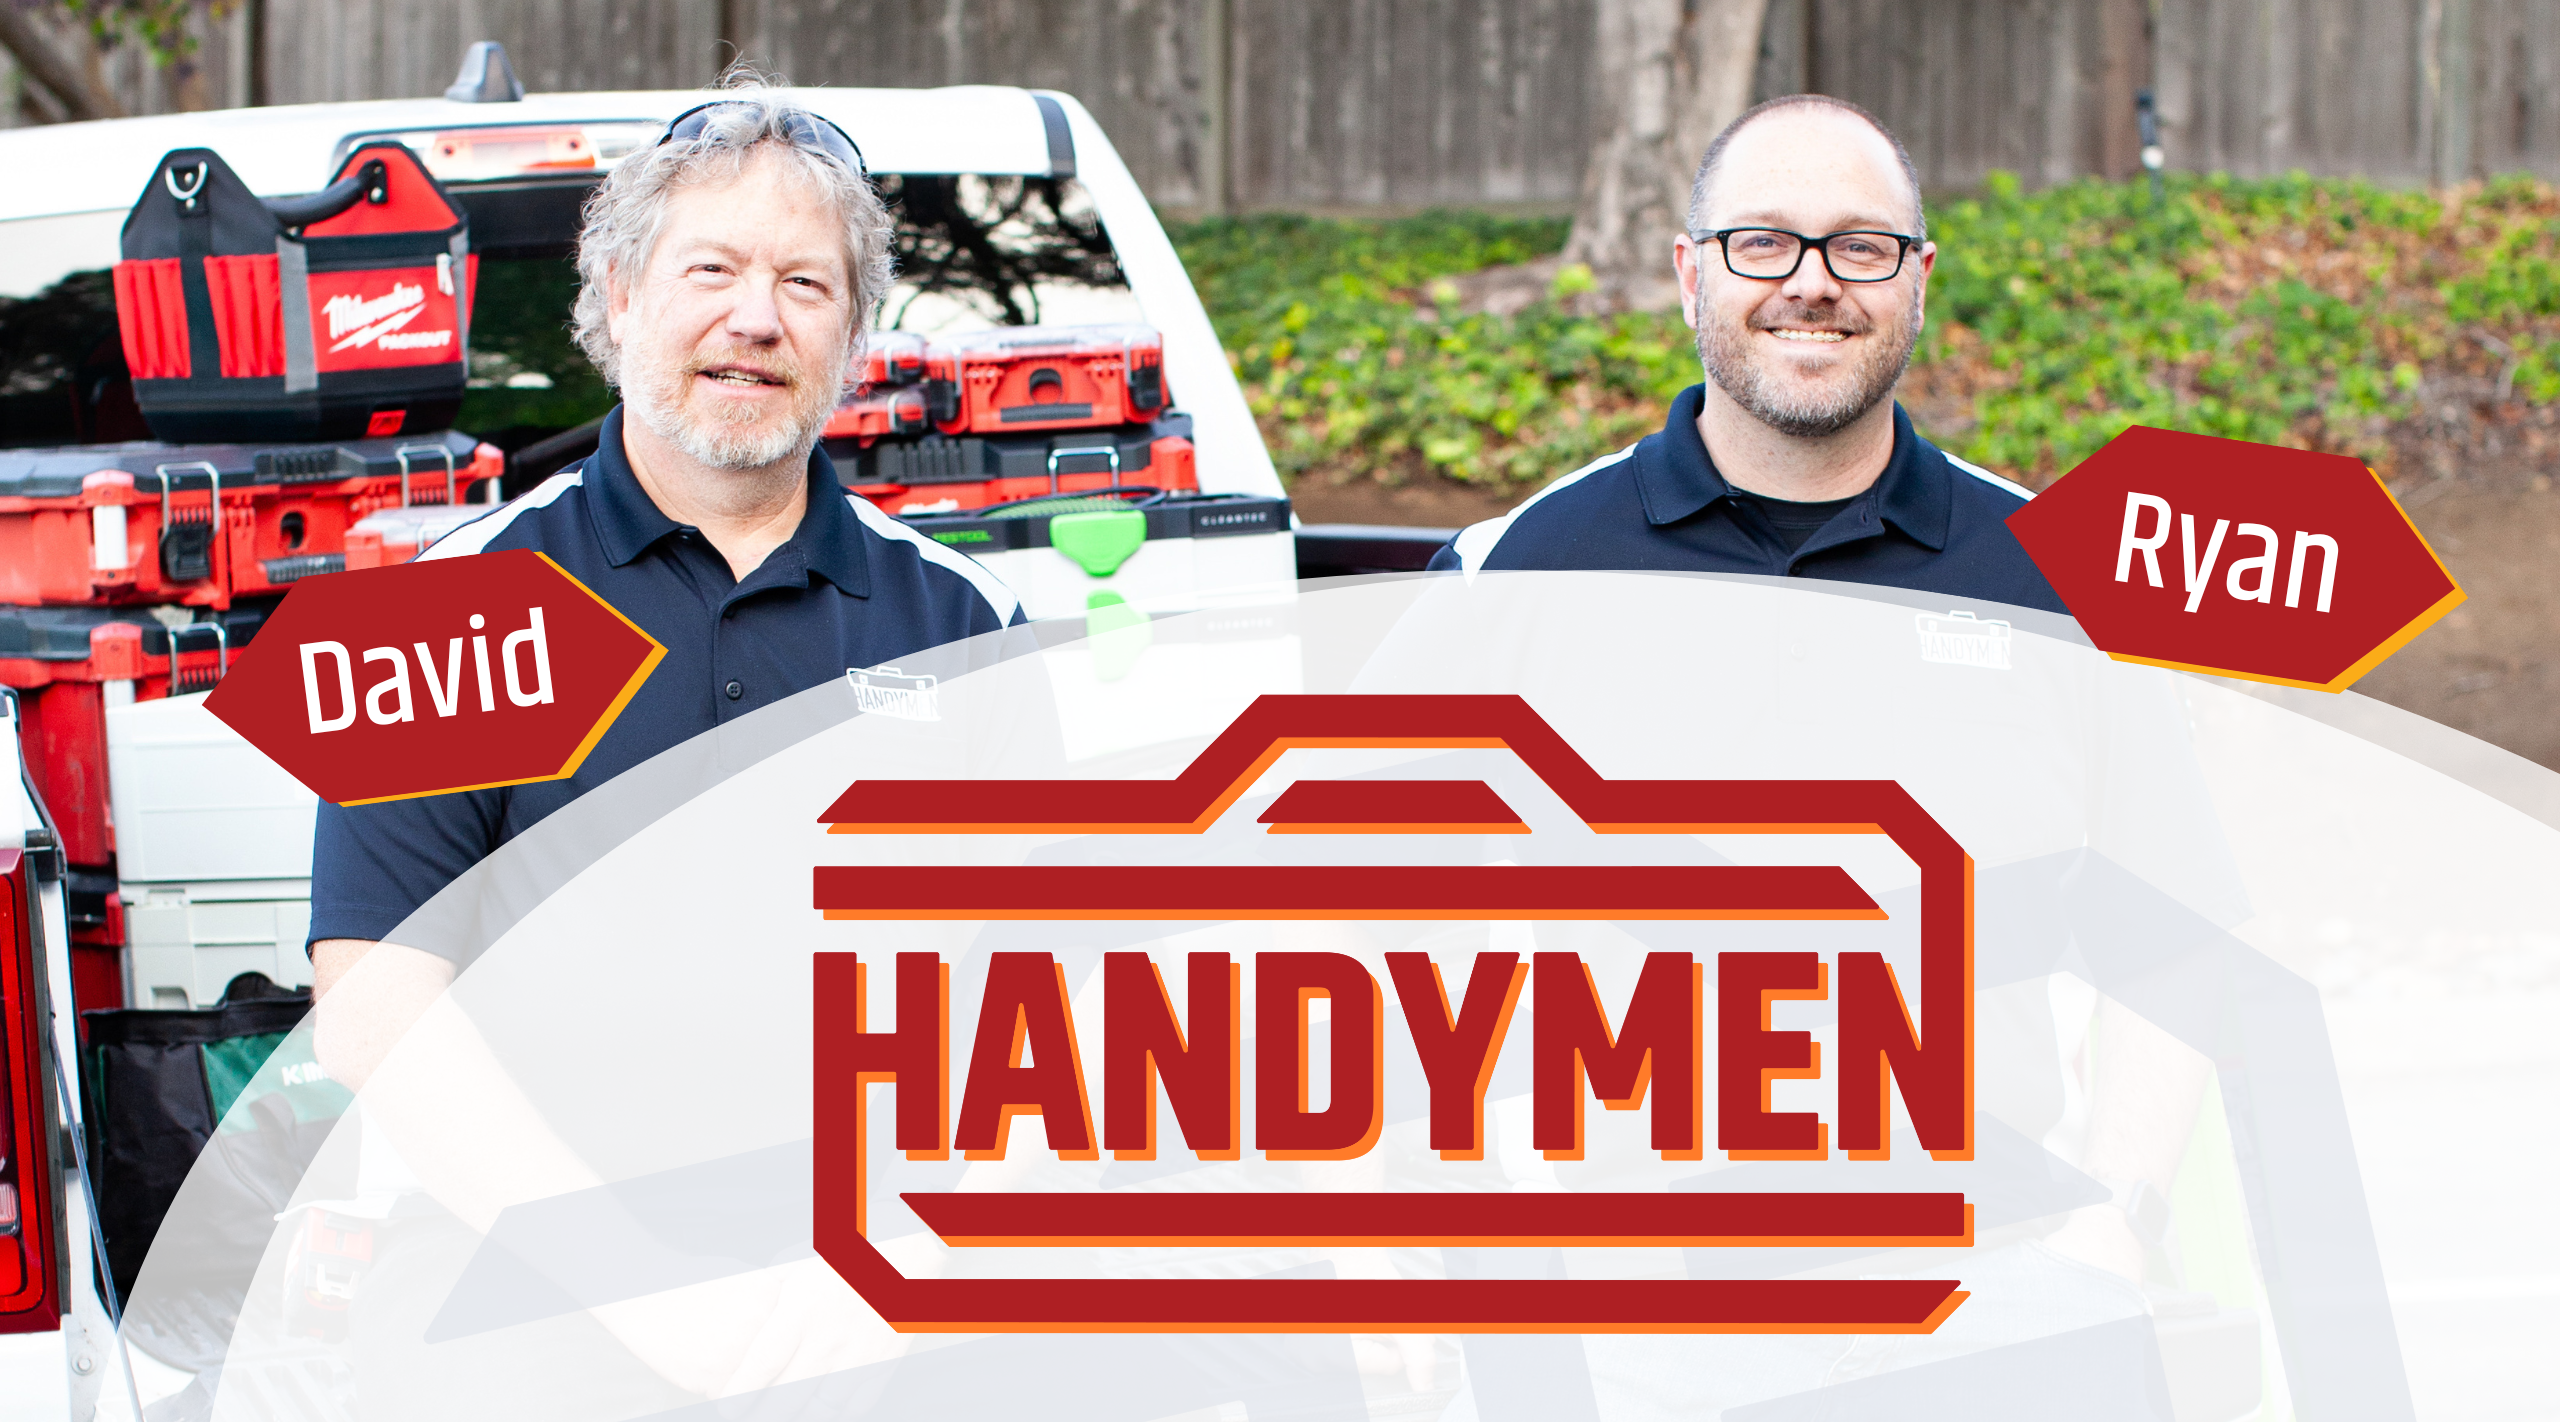 A photo of the Handymen parters standing side by side and featuring the Handymen logo.